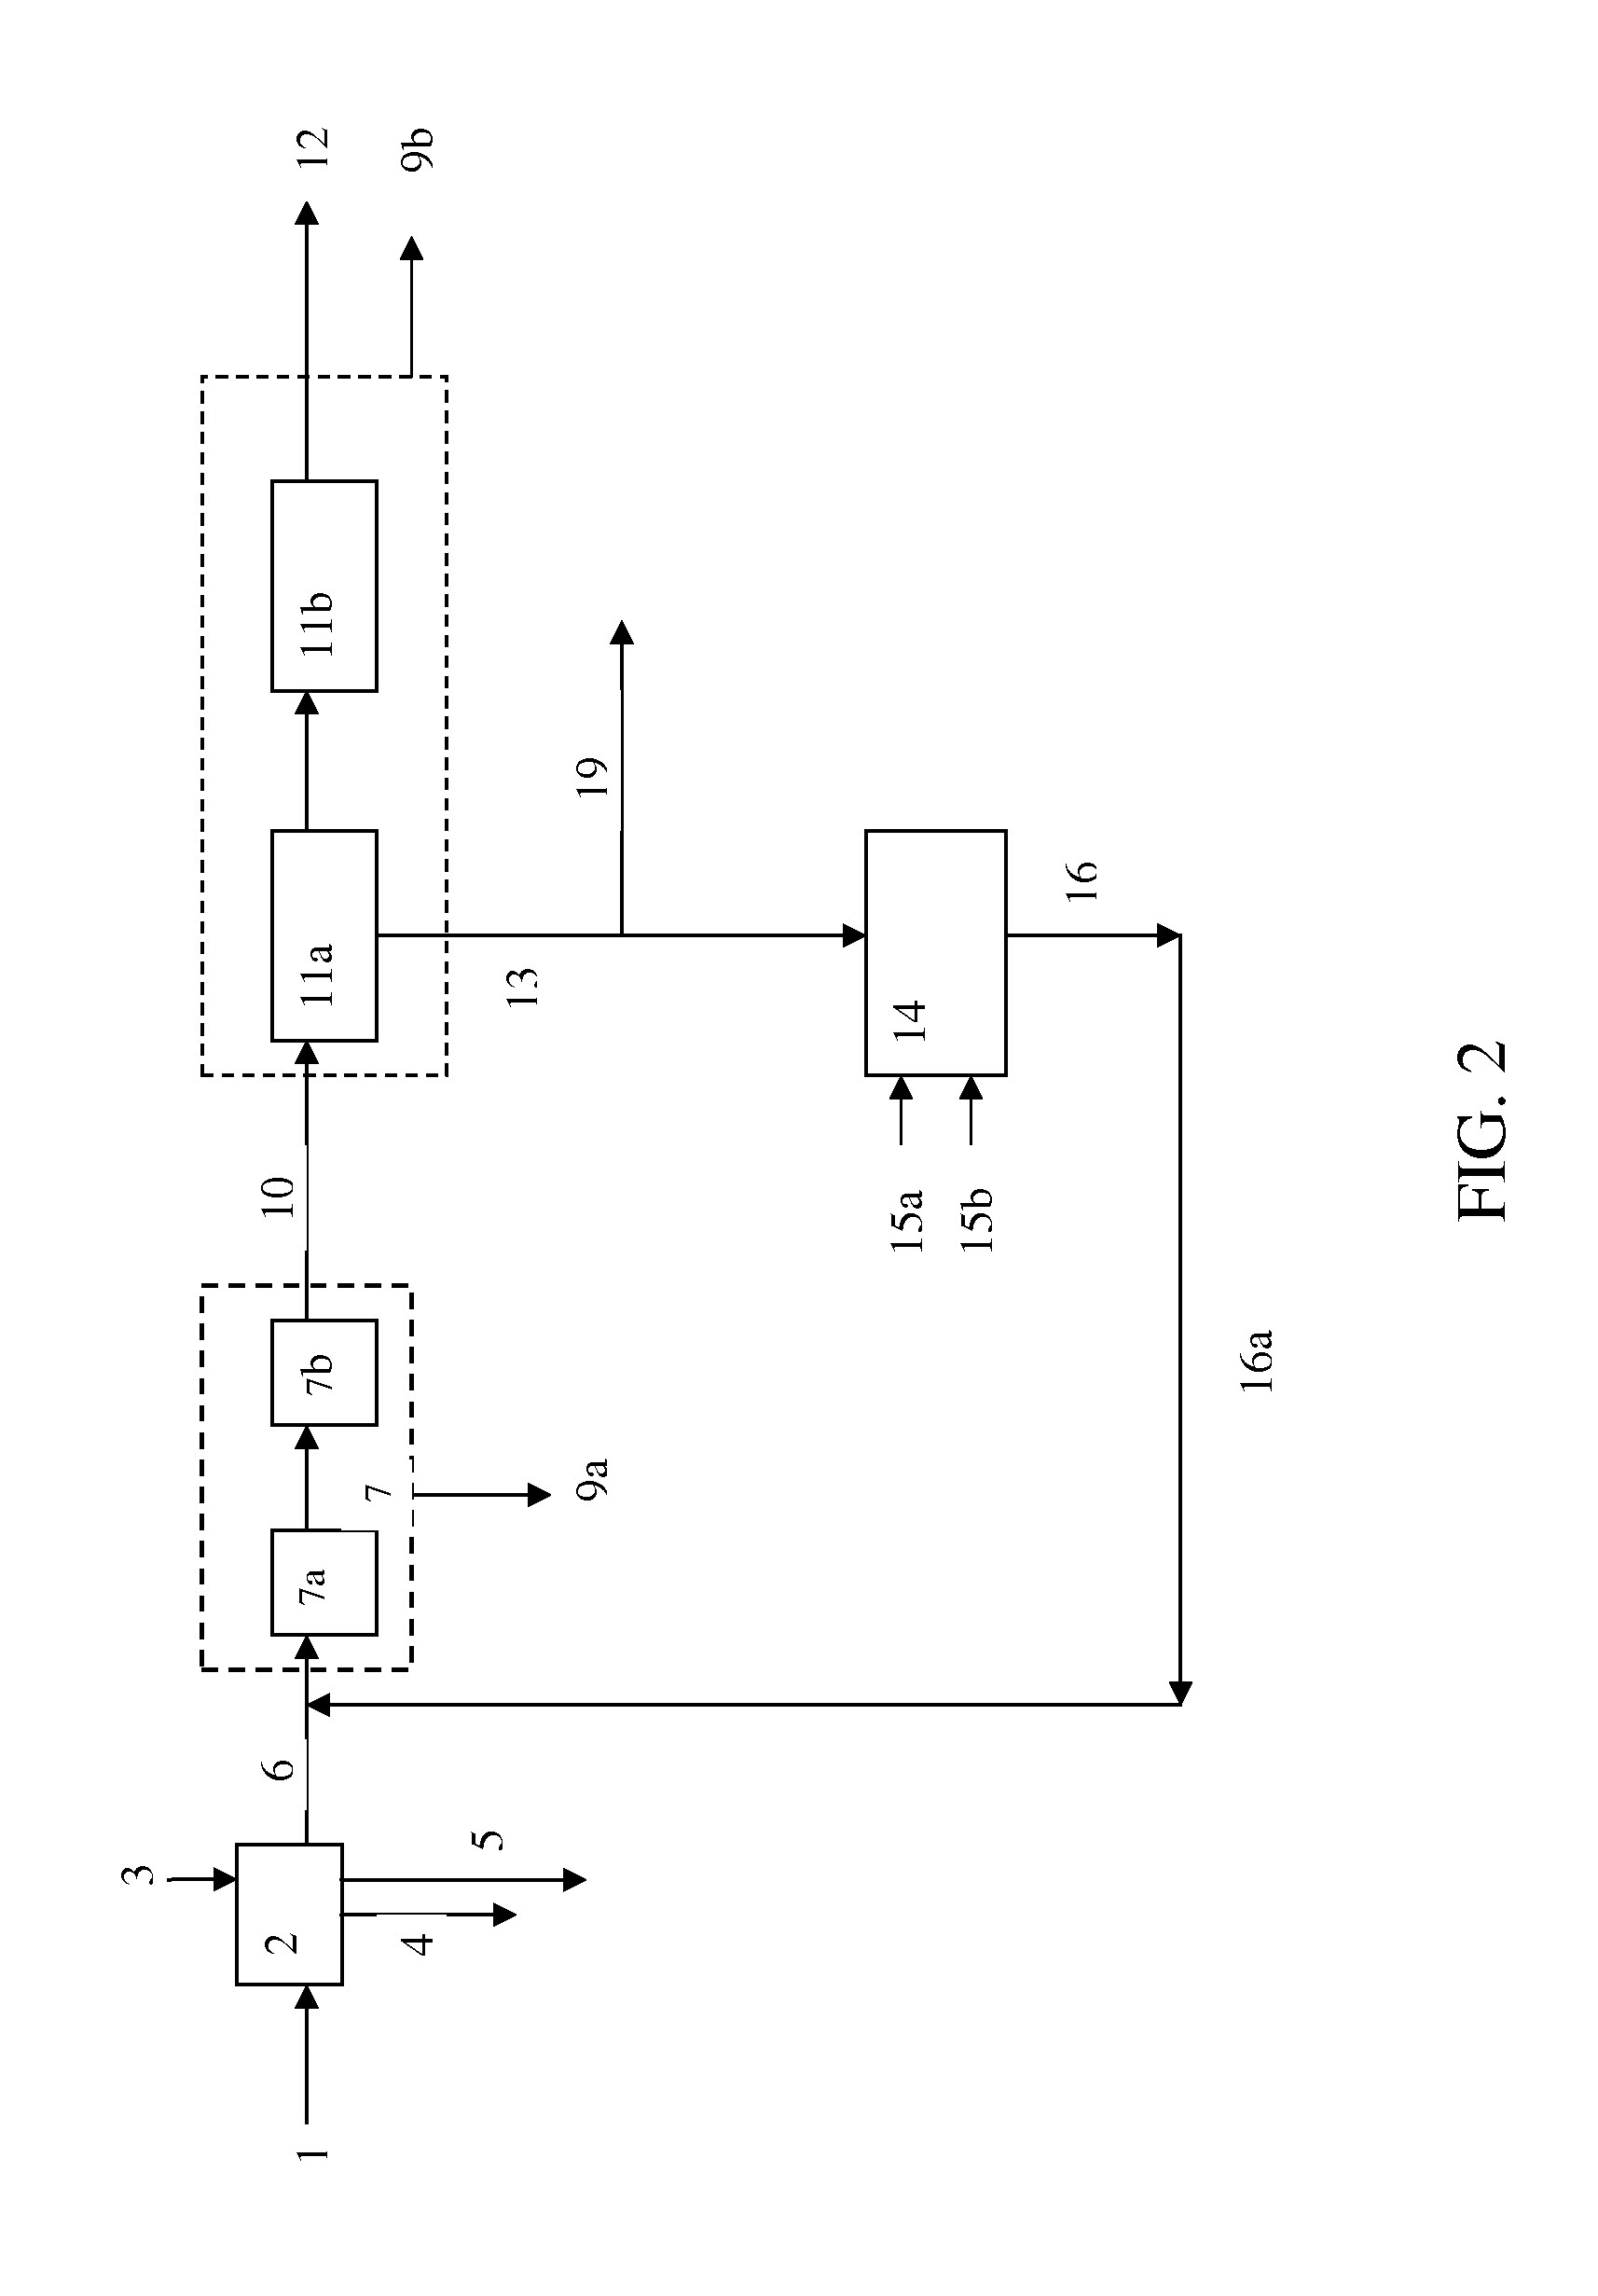 Method for producing ethanol and solvents from lignocellulosic biomass including the recirculation of a butyl wine obtained by fermenting pentoses